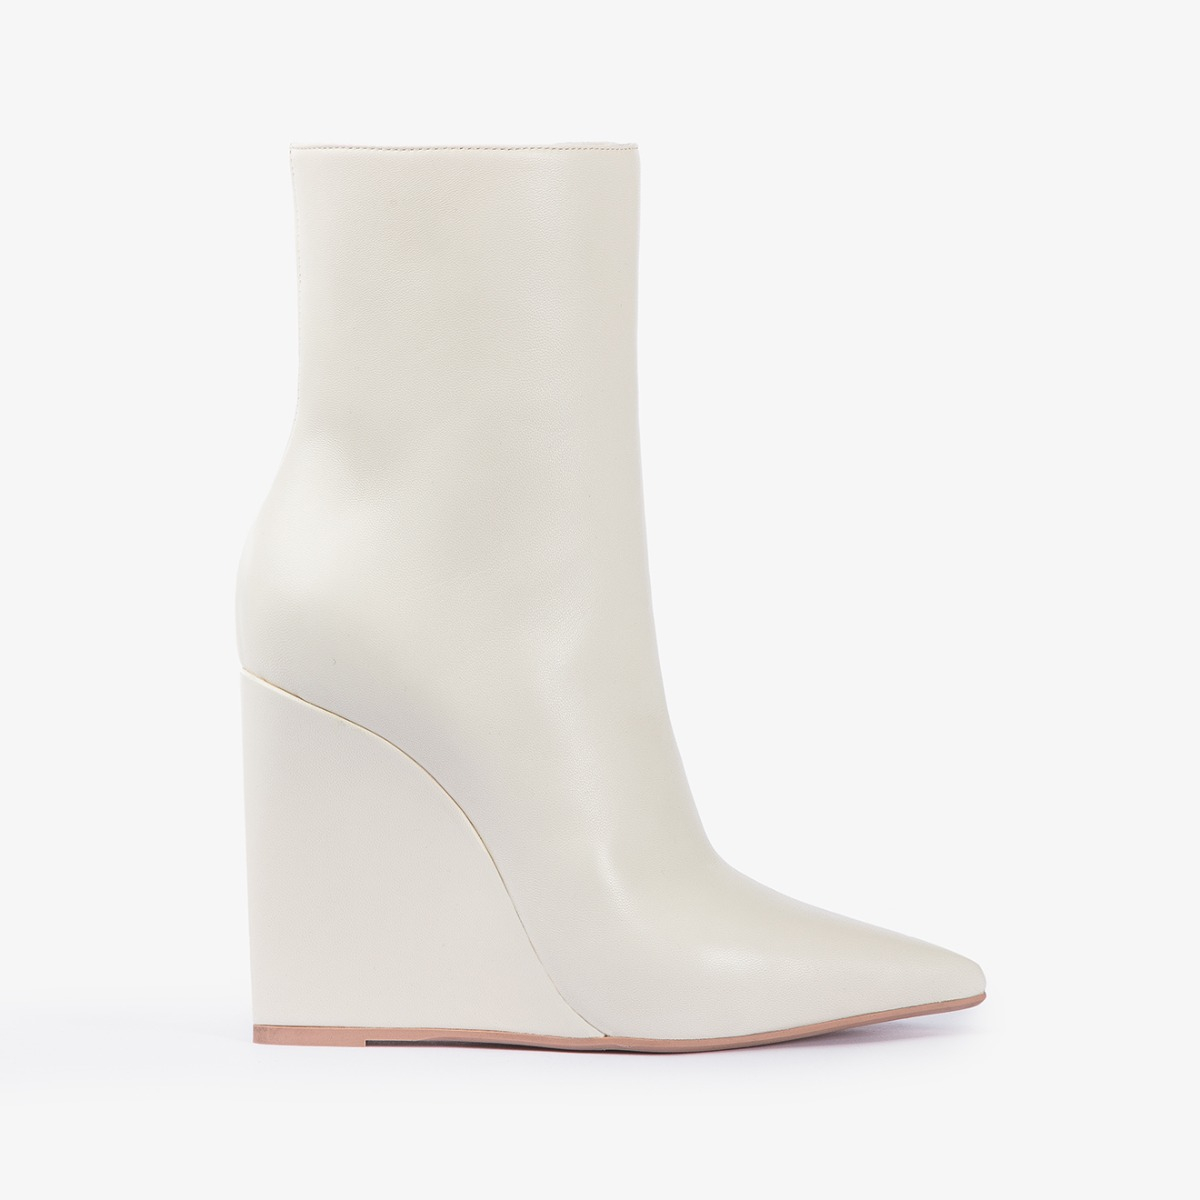 KIRA ANKLE BOOT 120 mm - Le Silla | Official Online Store